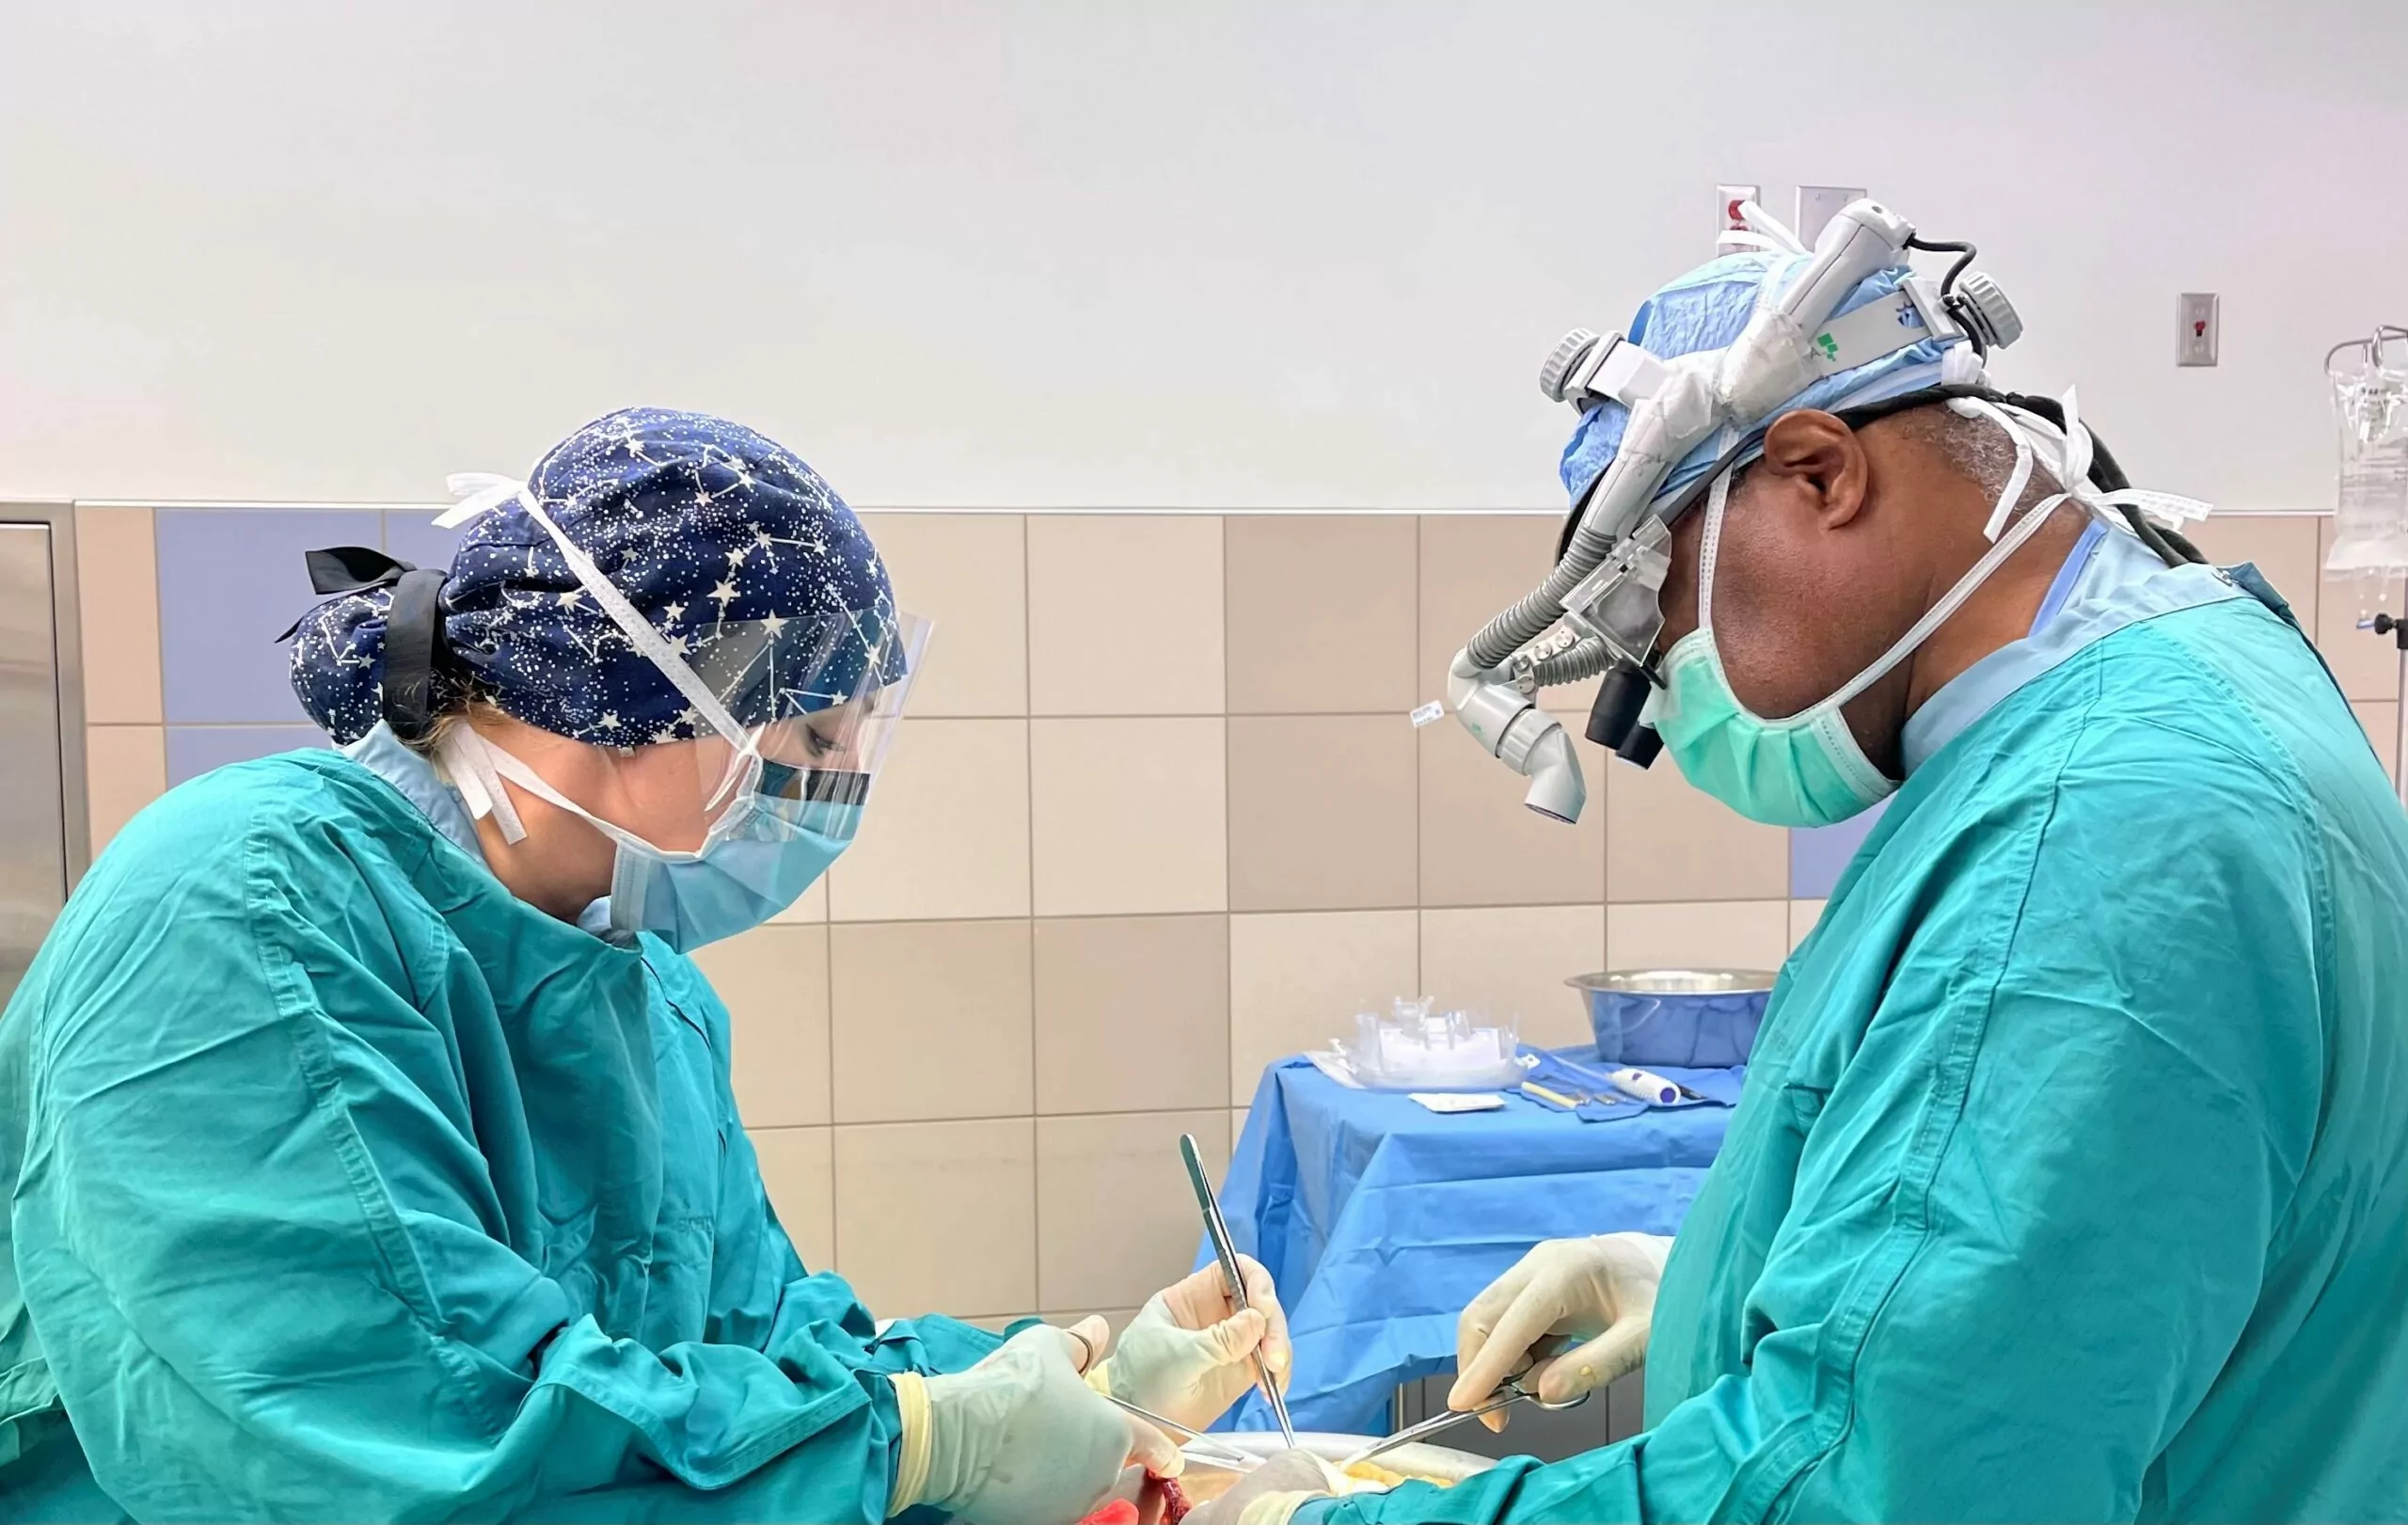 Recovery technicians and transplant surgeon in the operating room, holding surgical instruments